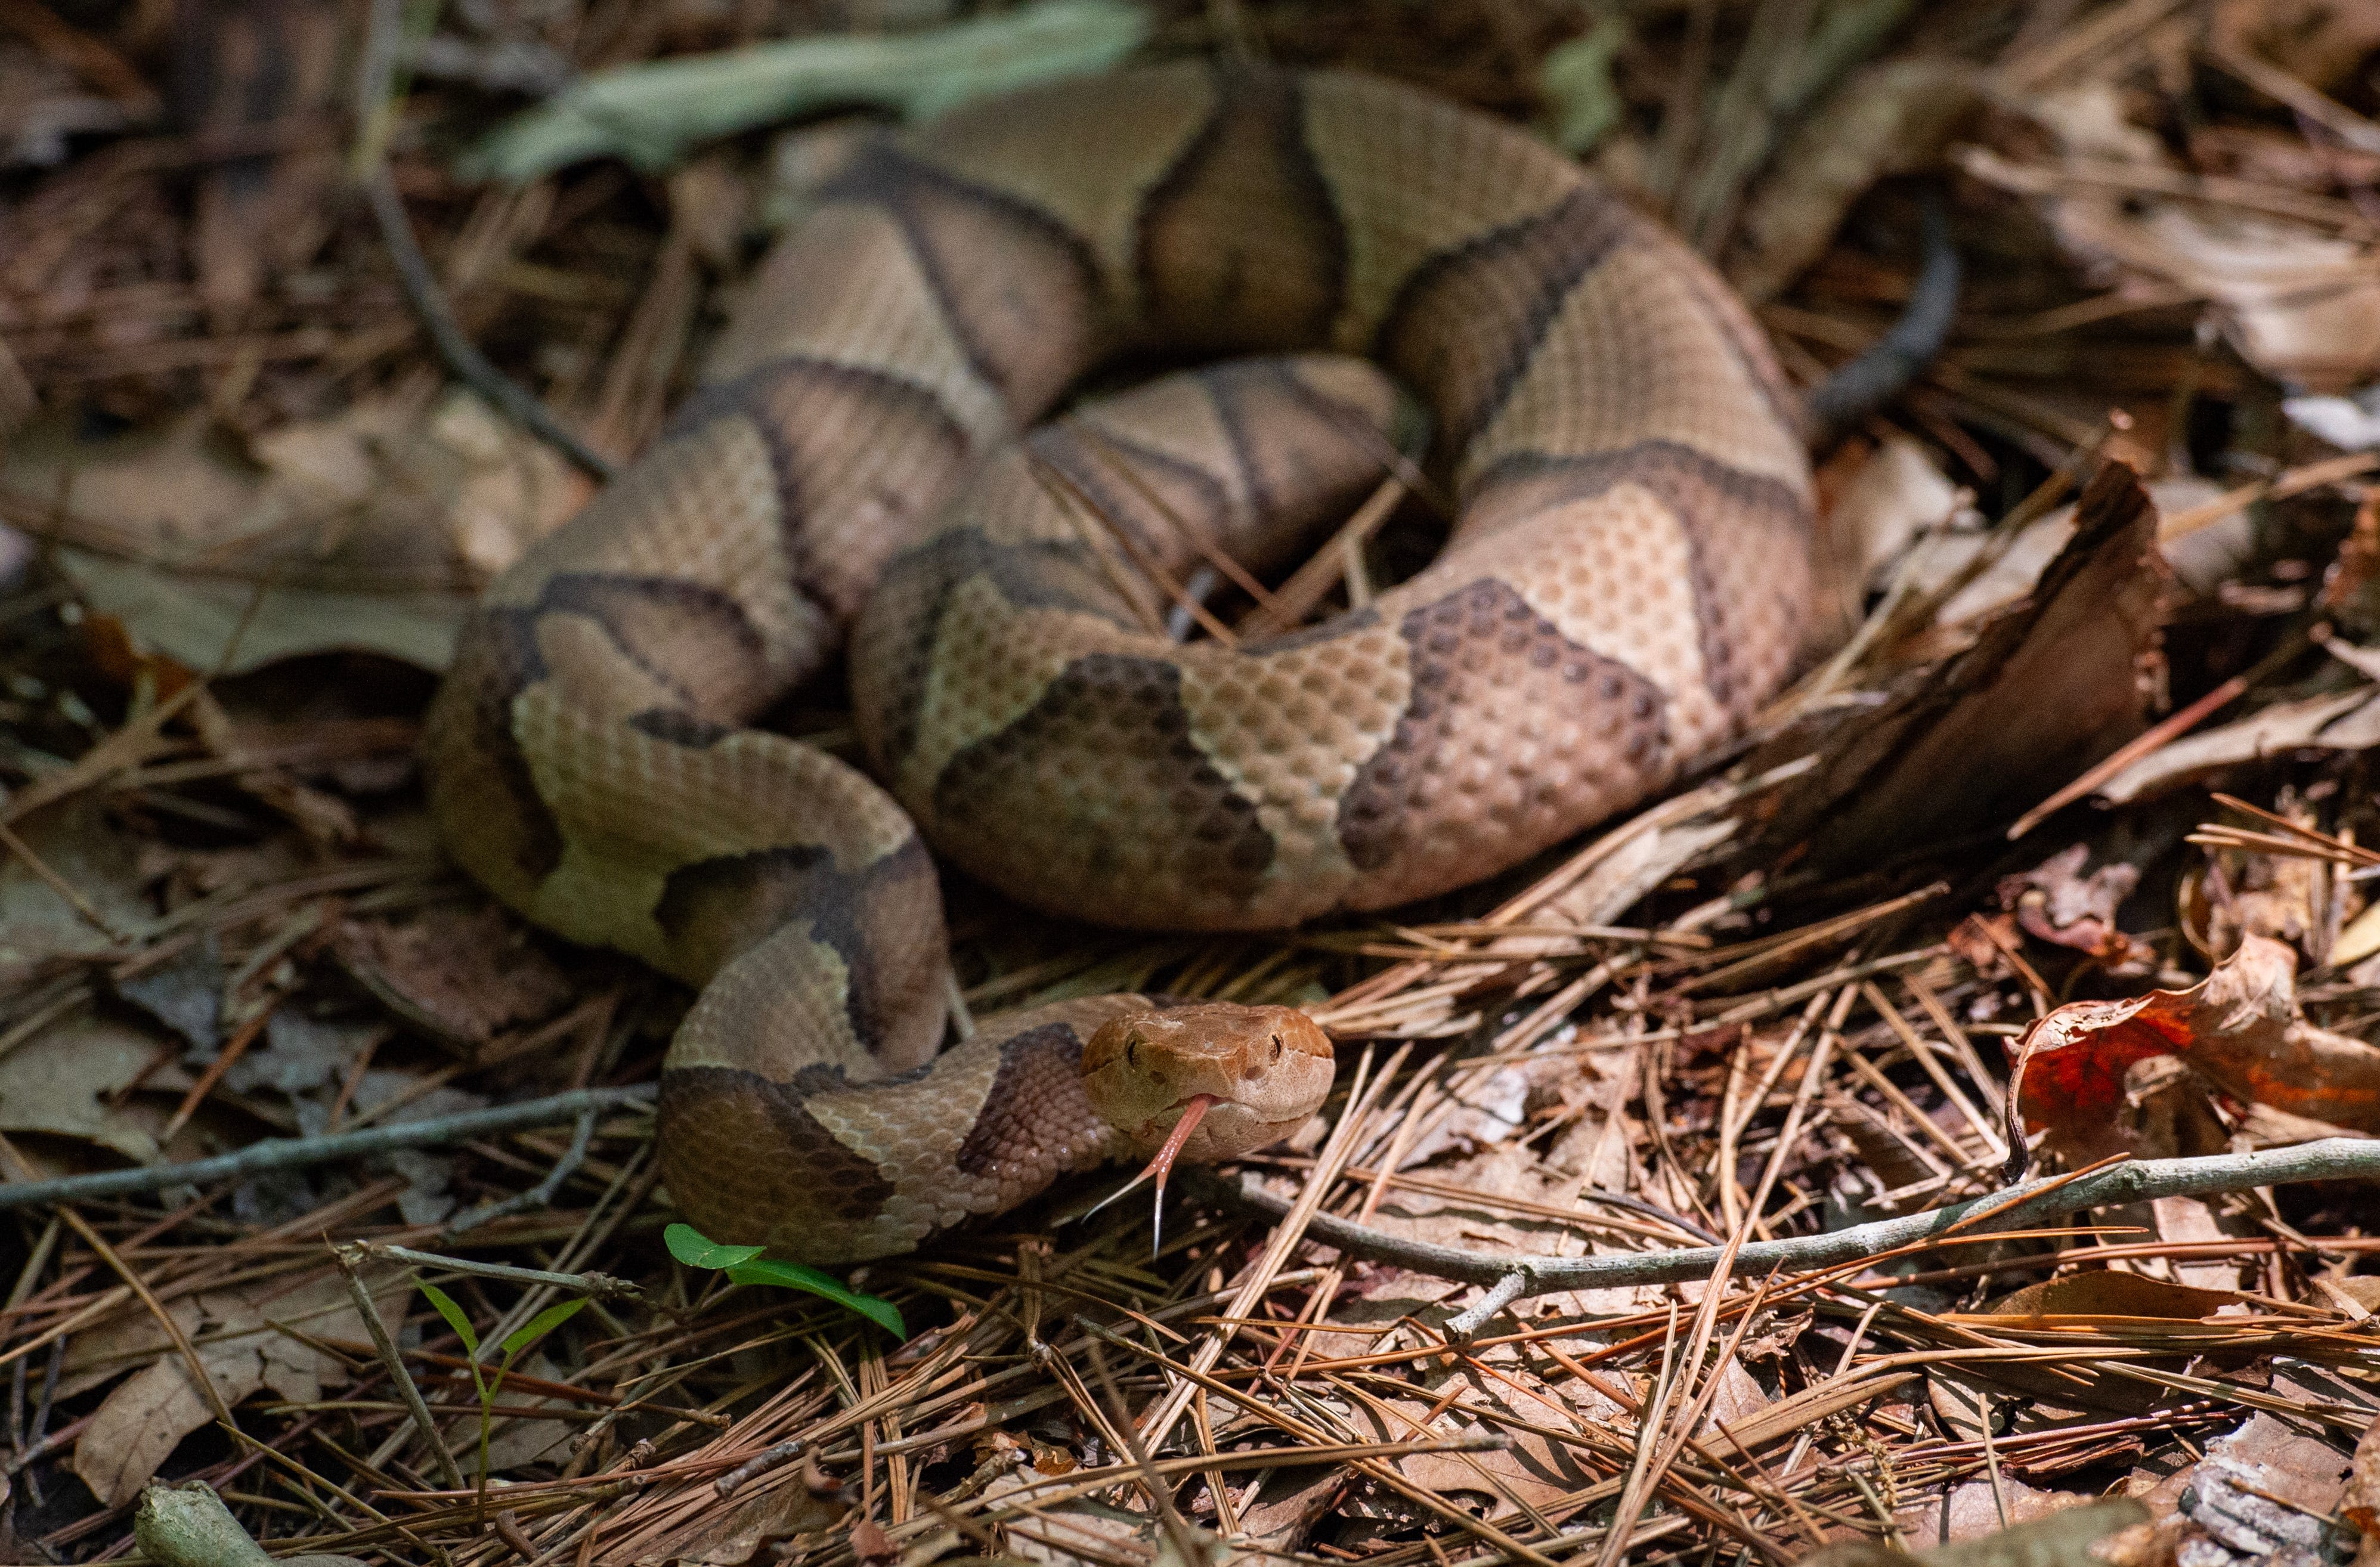 Mississippi venomous snakes: How to identify them and what to do, and not do, if bitten